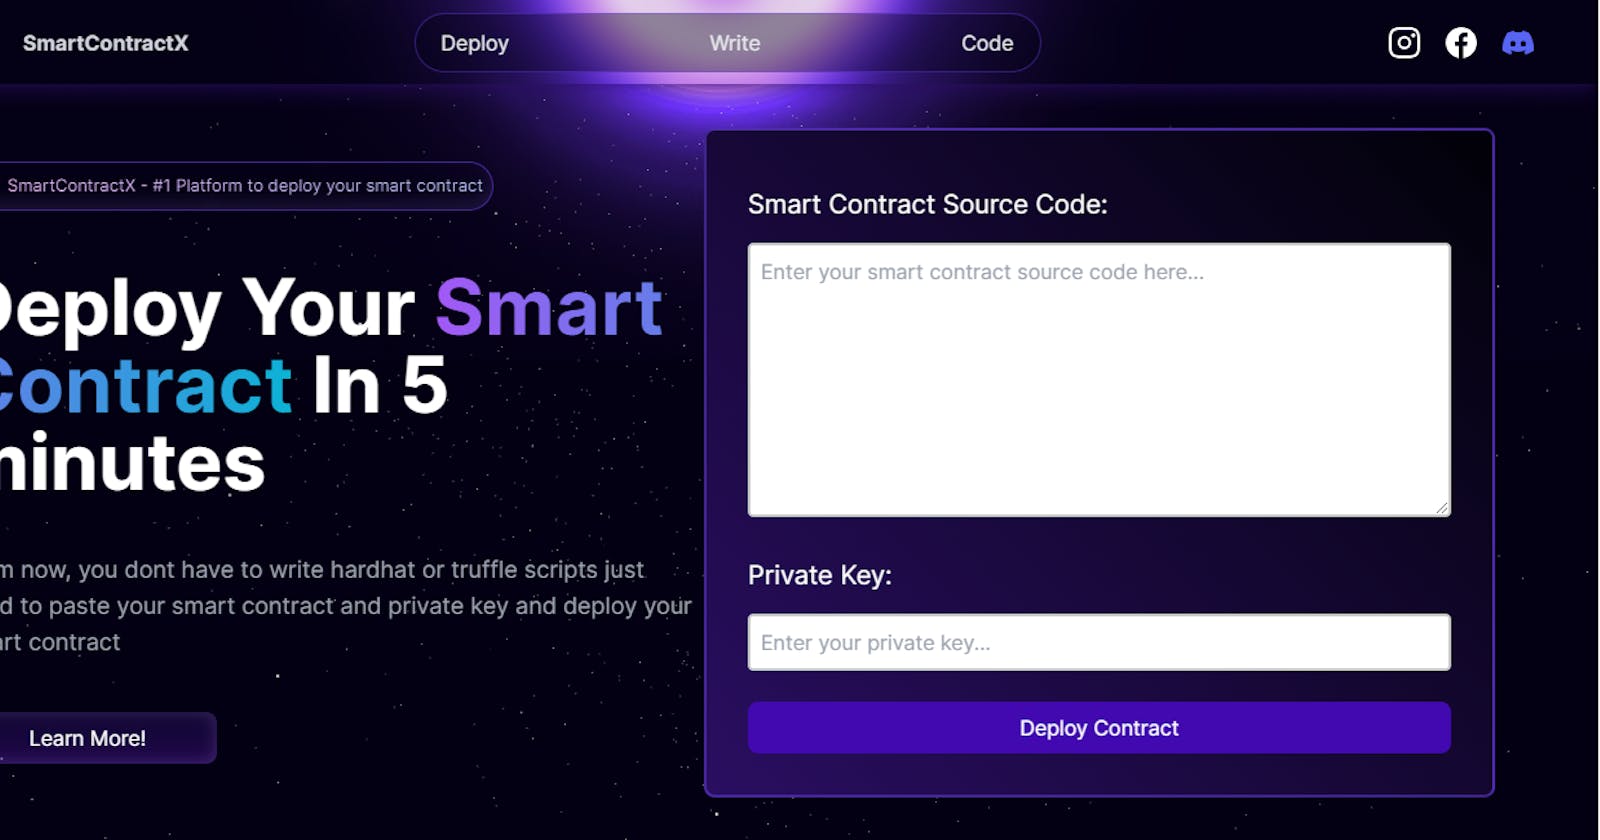 Made a Dapp to Generate, Deploy and Test Smart Contract 🔥